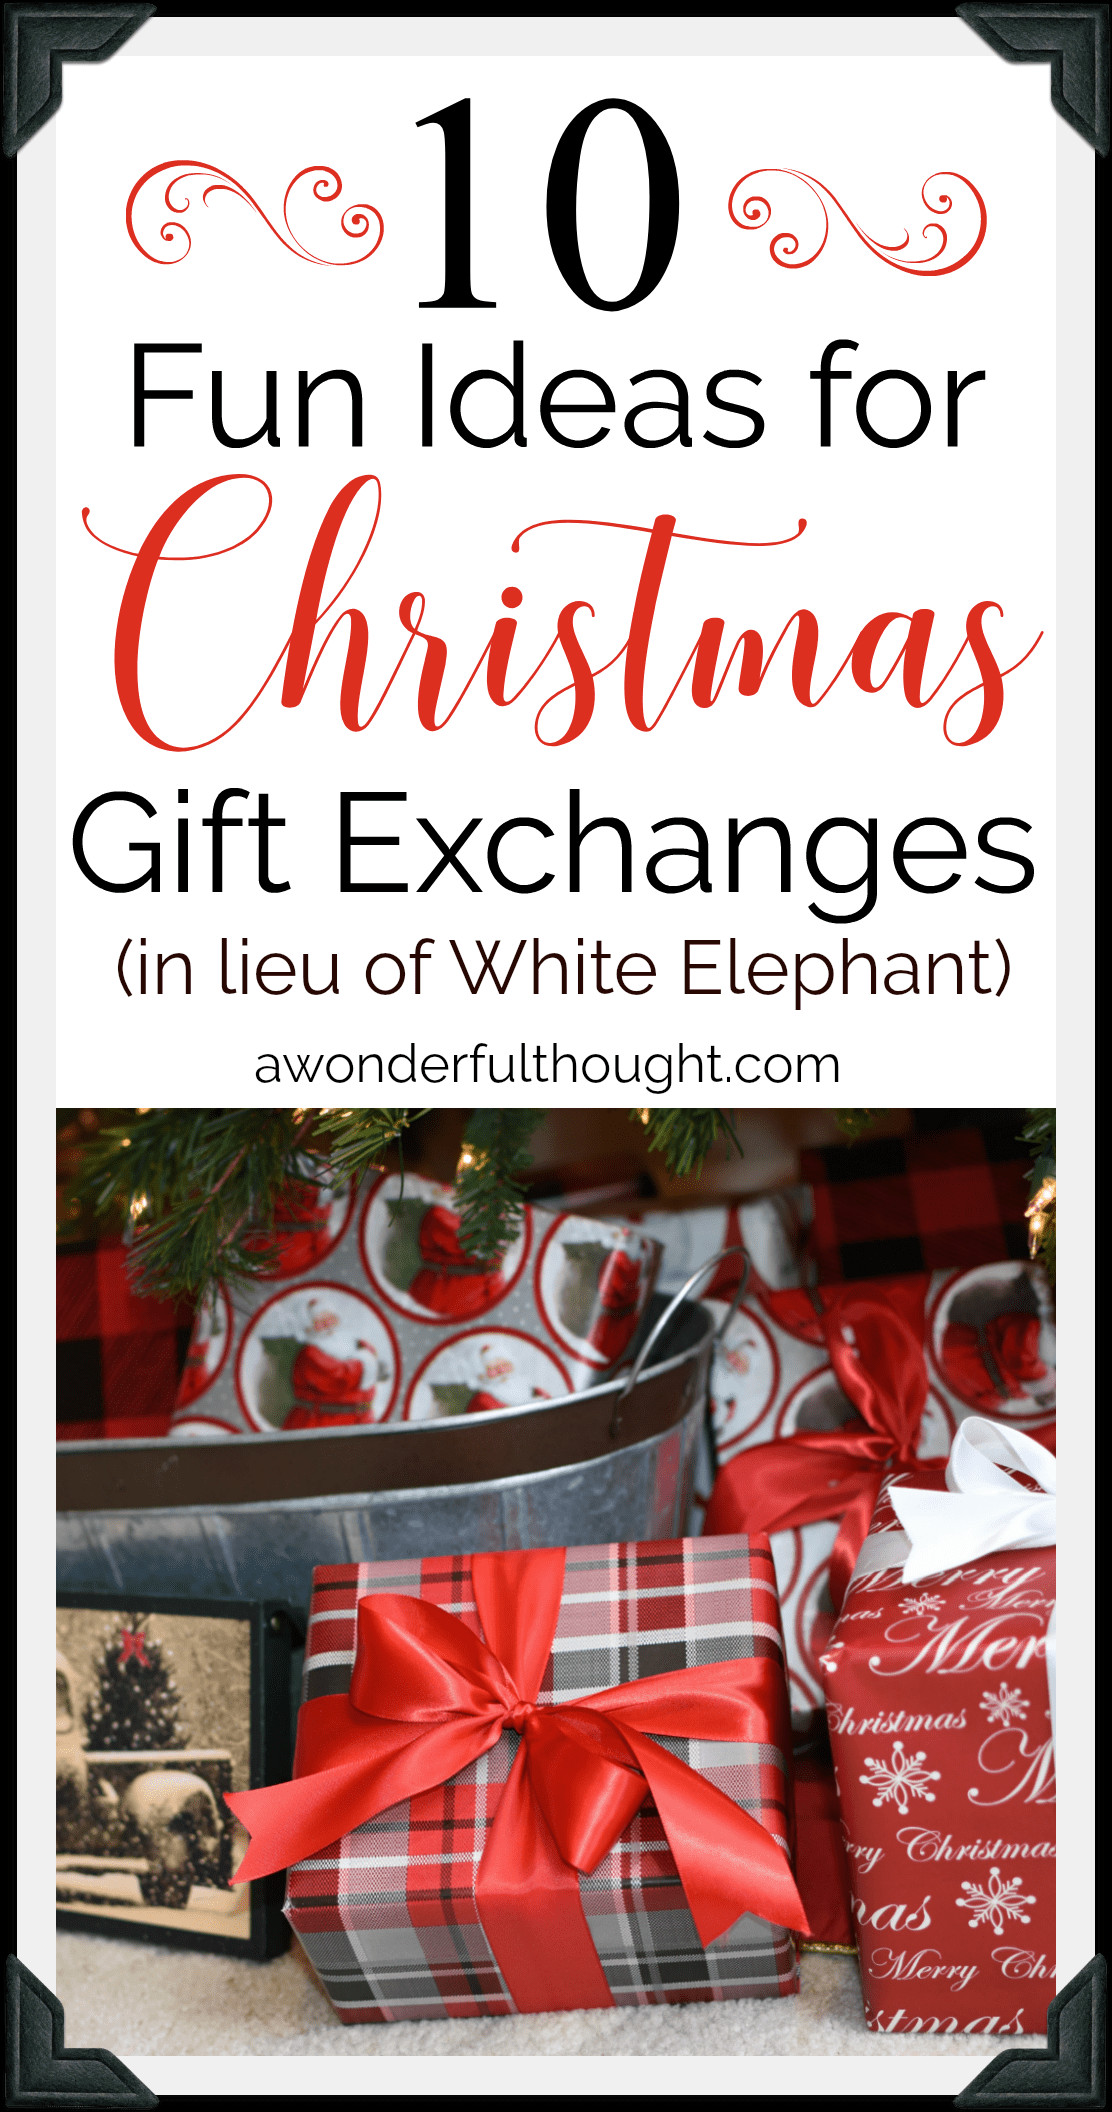 Christmas Exchange Gift Ideas
 Christmas Gift Exchange Ideas A Wonderful Thought